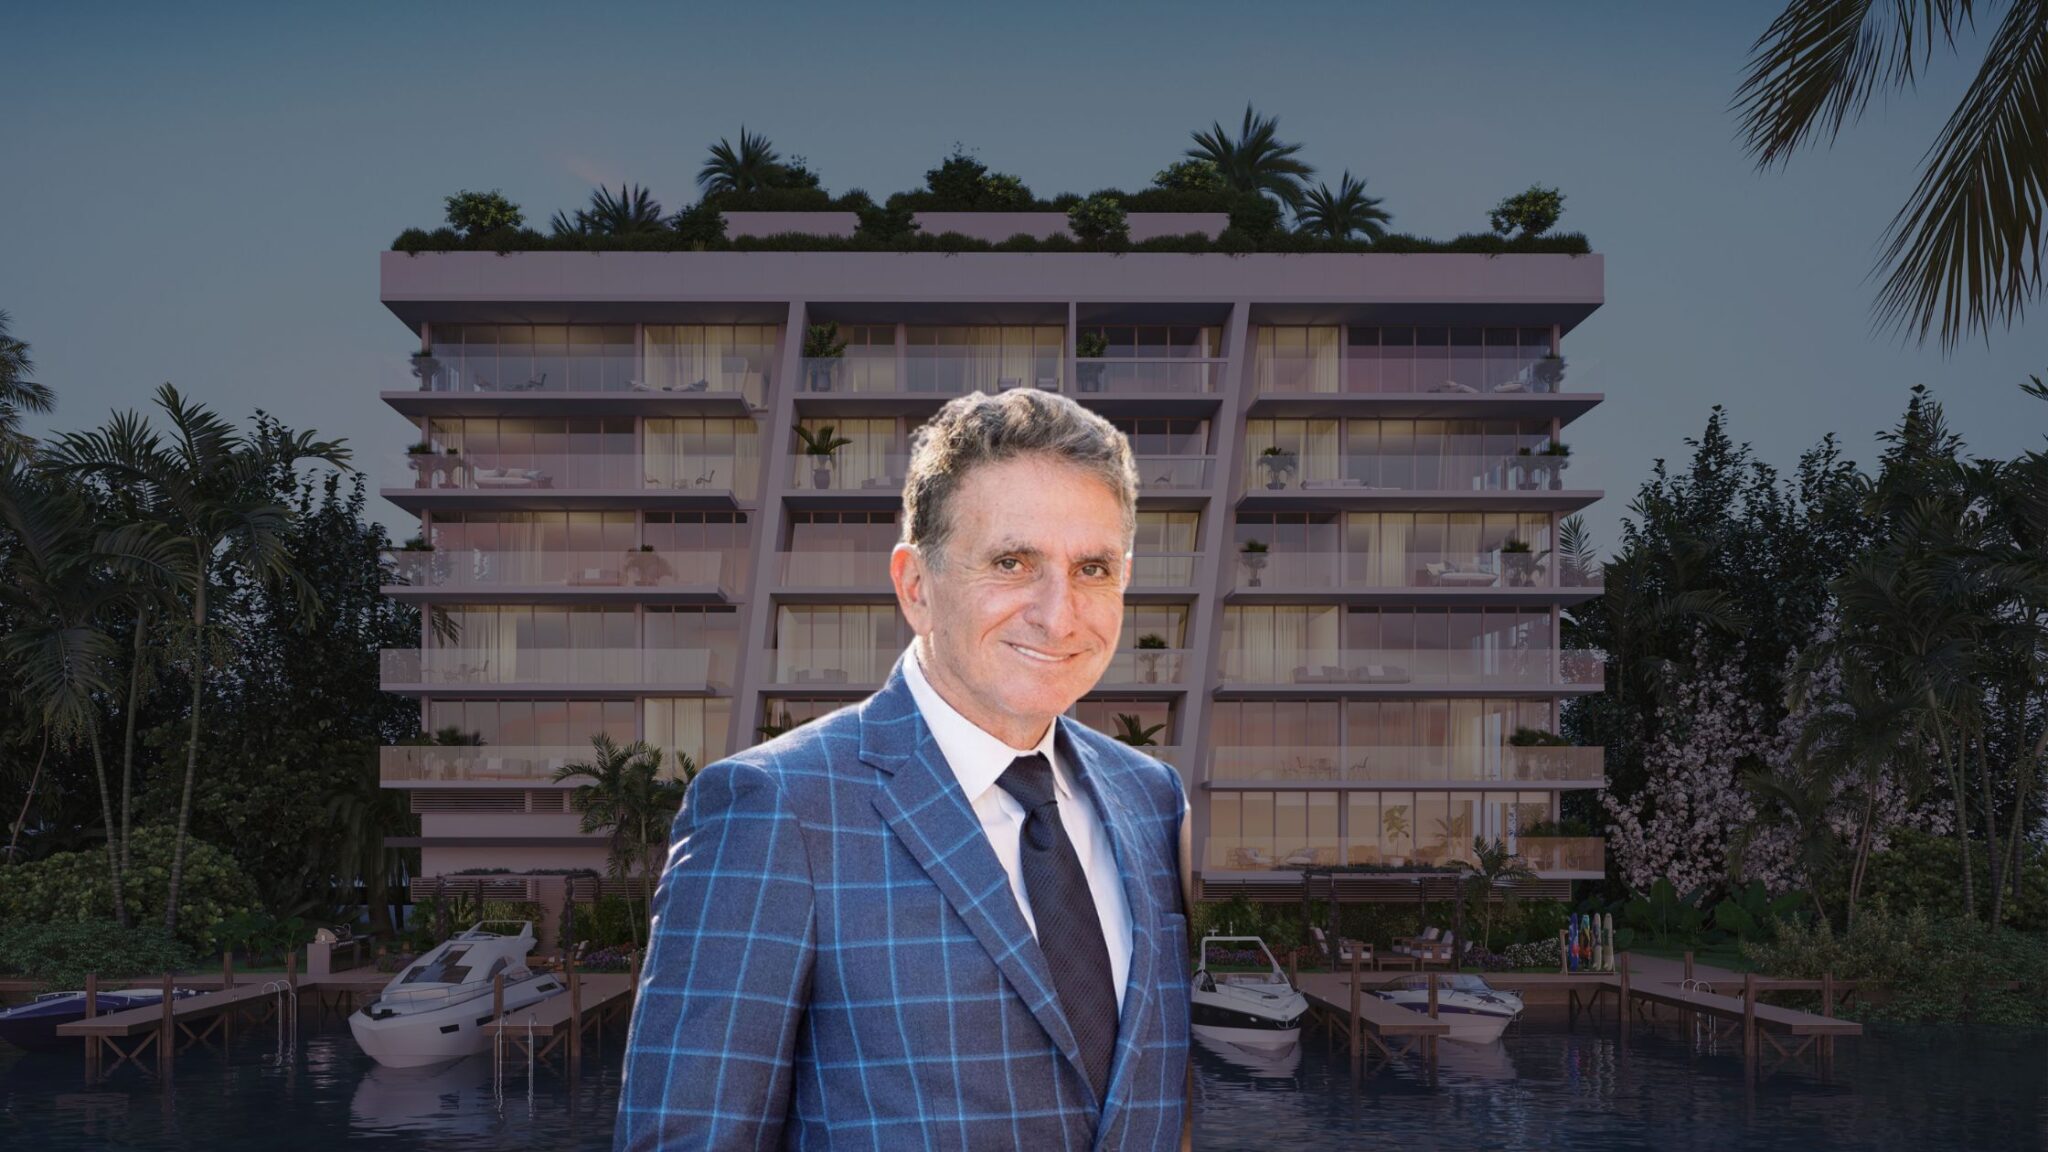 david marom developer of horizon properties with his 9900 west dr condo project in bay harbour islands